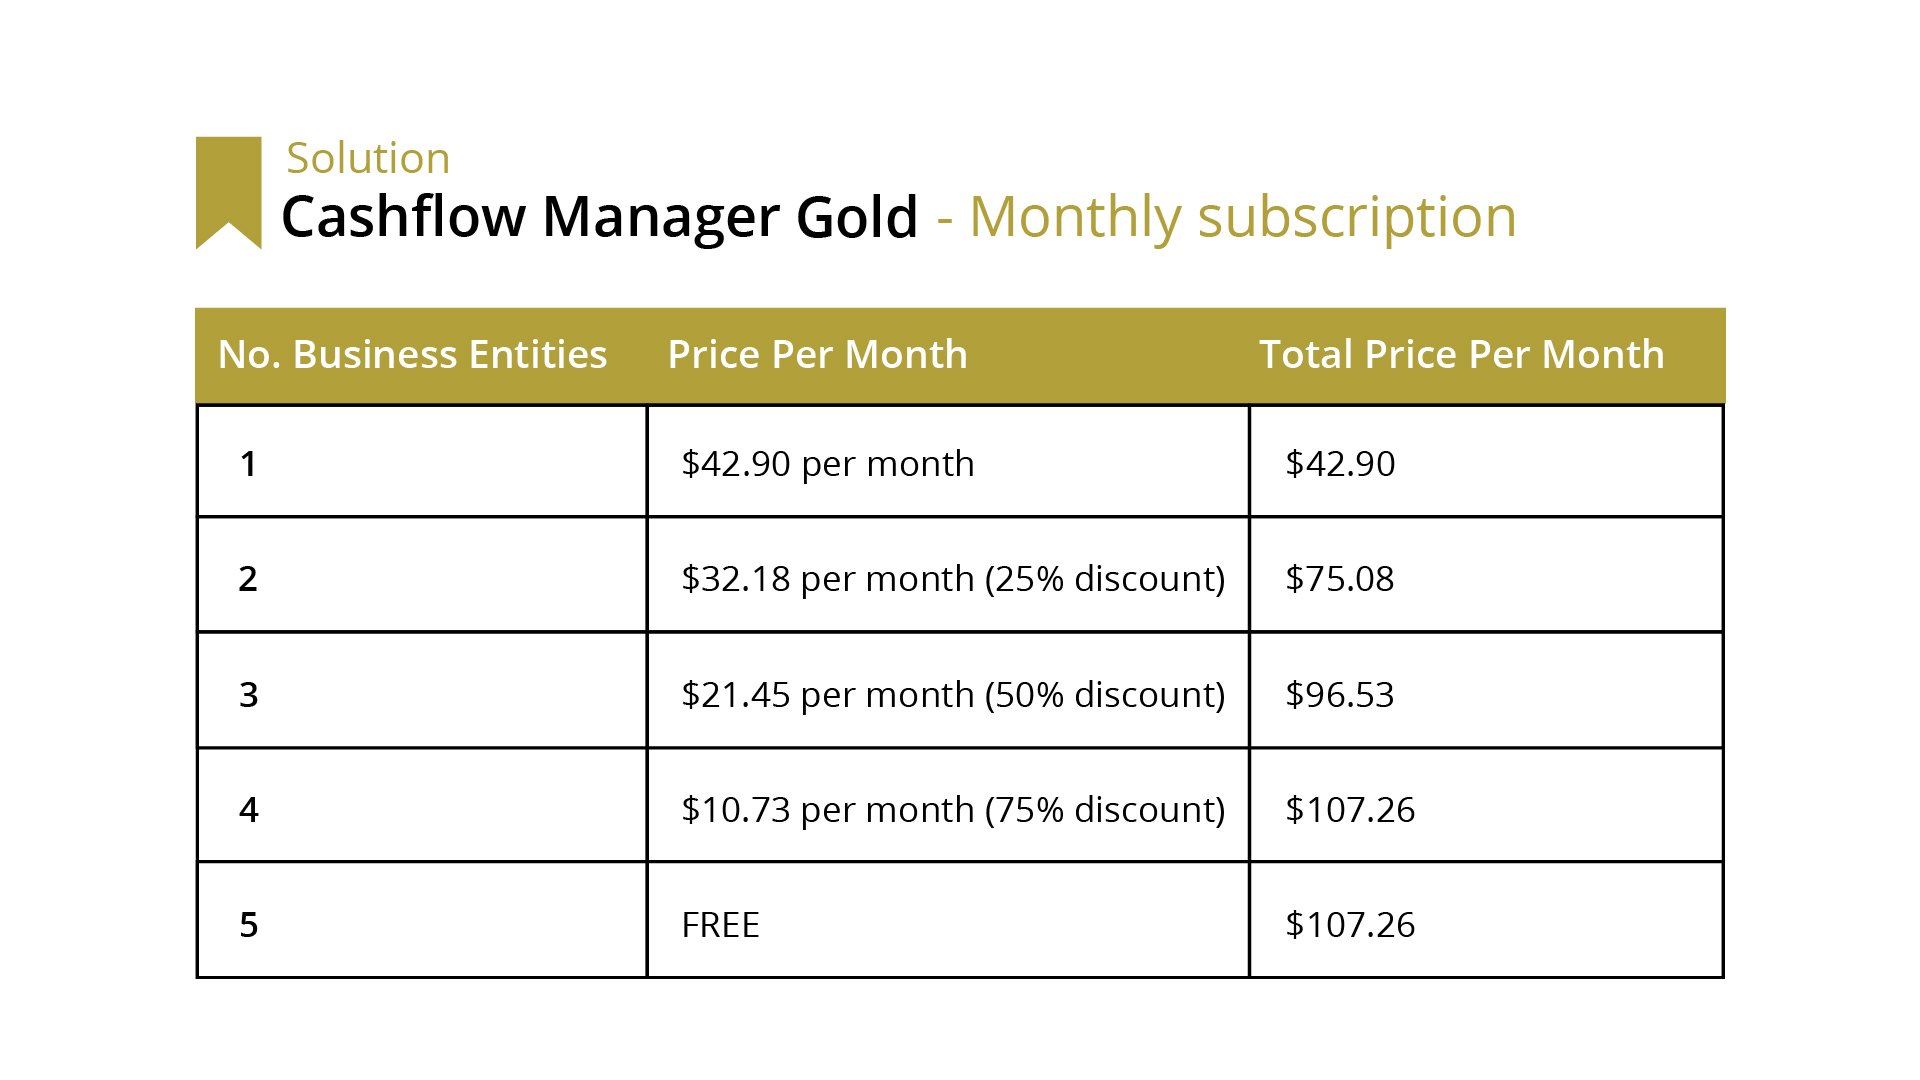 Cashflow Manager Gold monthly subscription